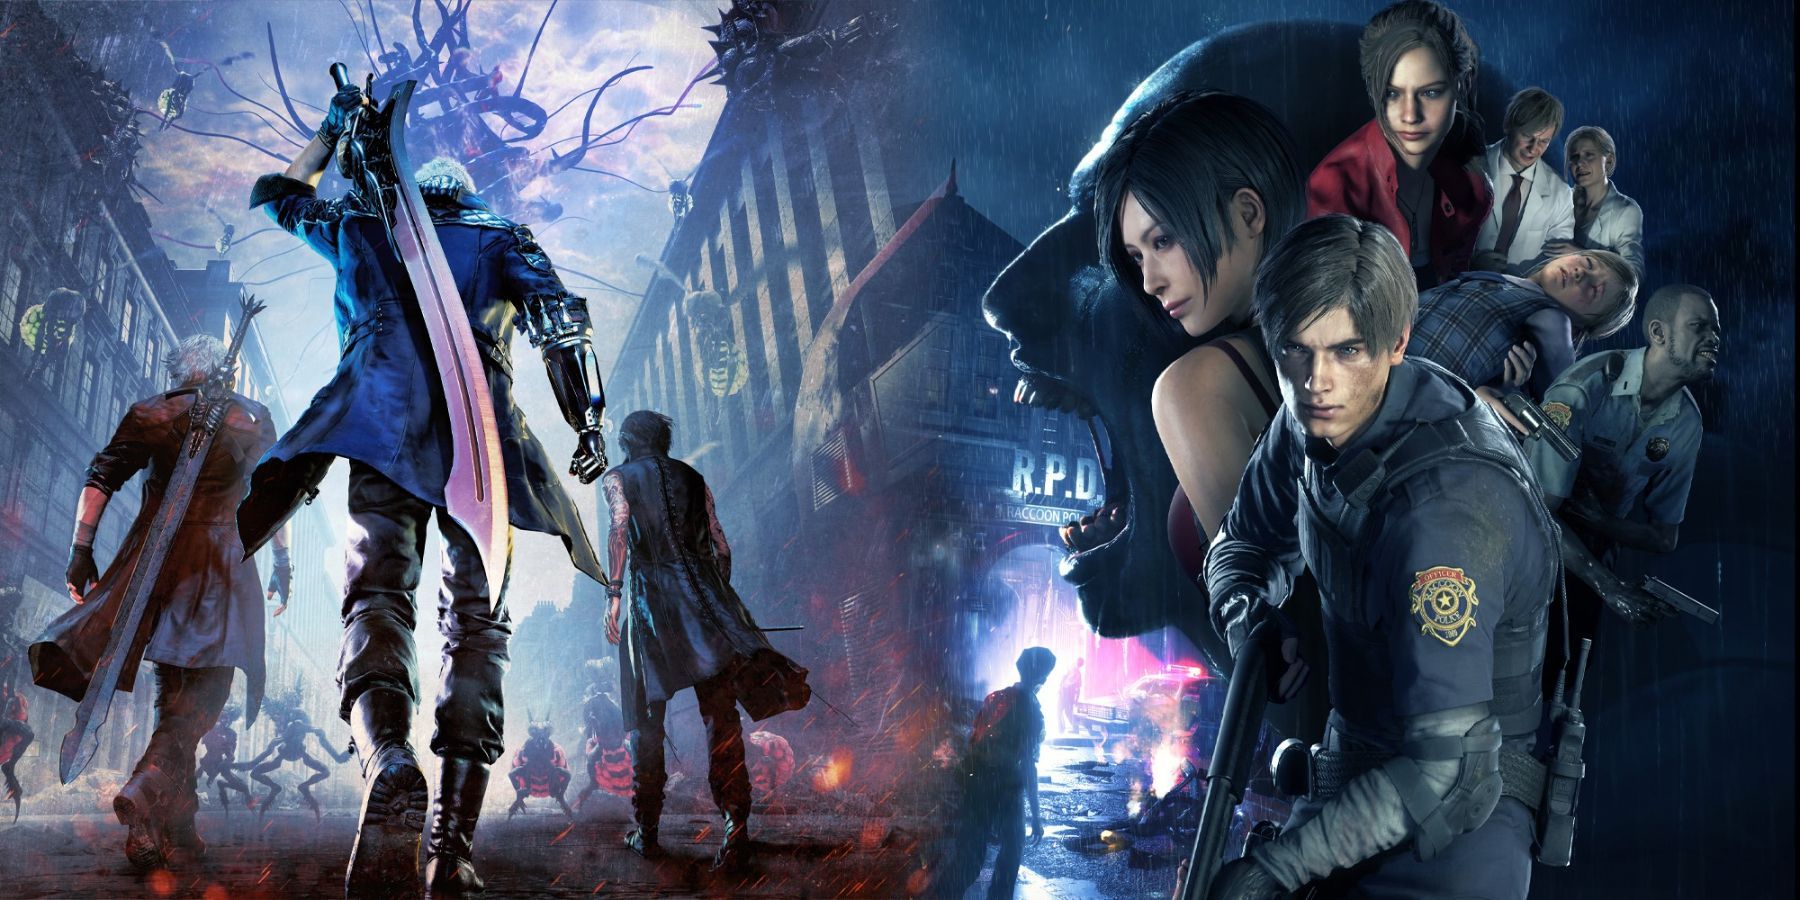 Resident Evil Devil May Cry Remakes Make Sense, But Would Quickly Run Into The Same Problem